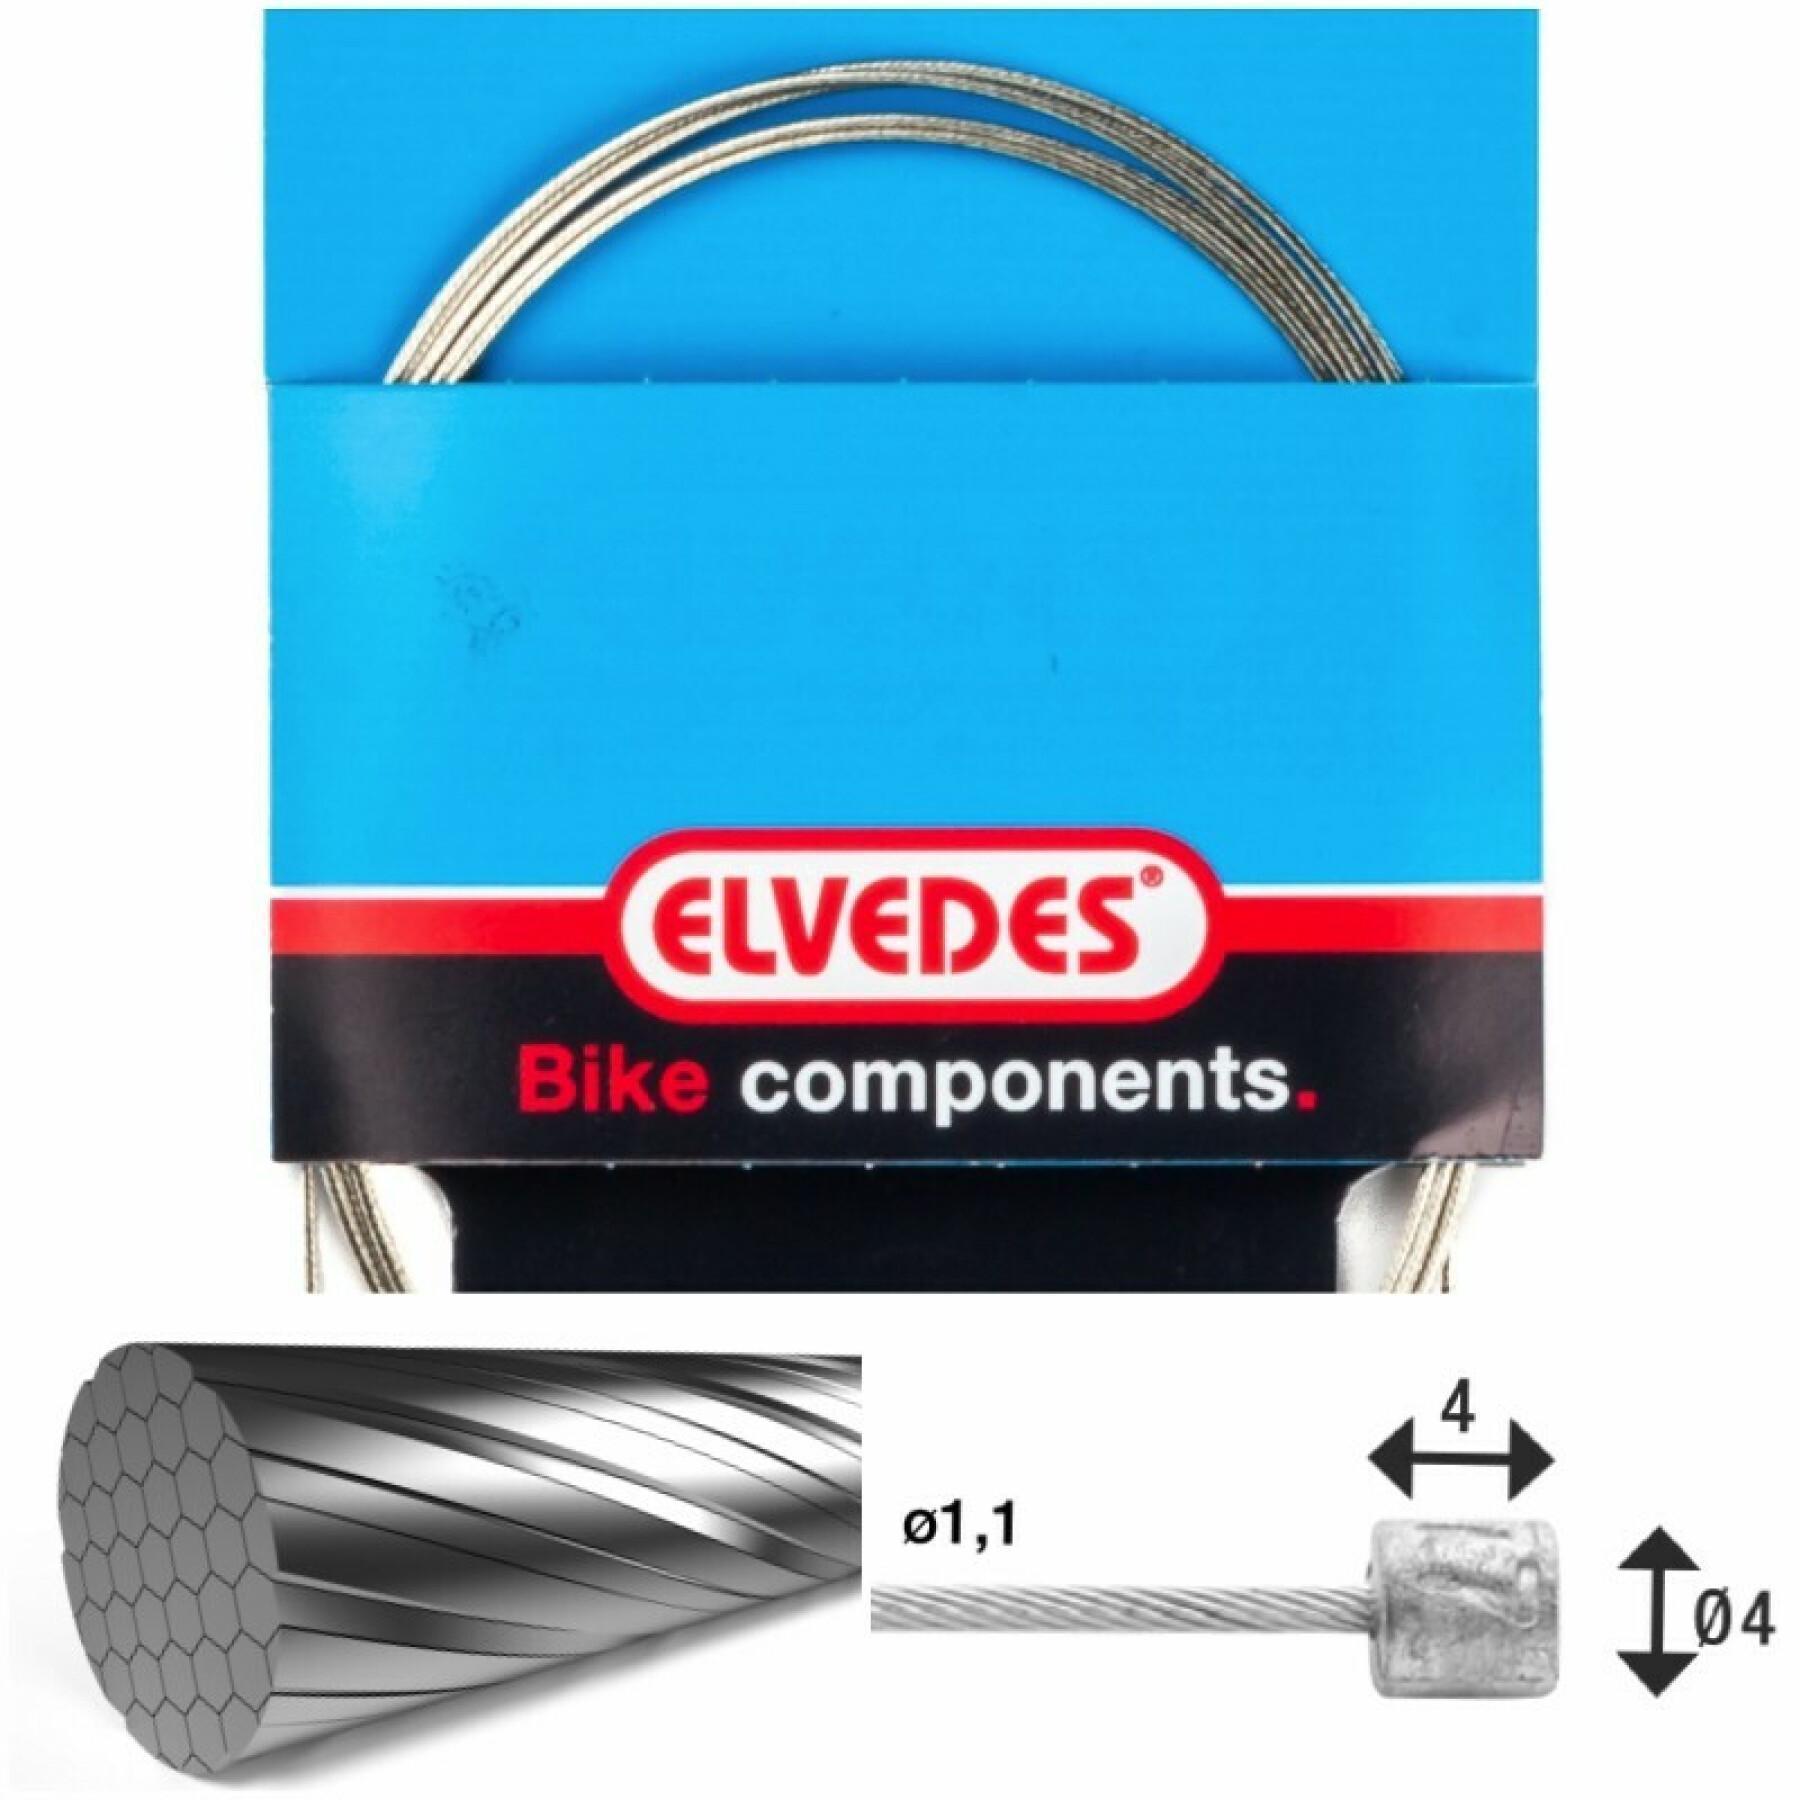 Transmission cable 7x7 slick stainless steel wires ø1,1mm with head n ø4x4 Elvedes